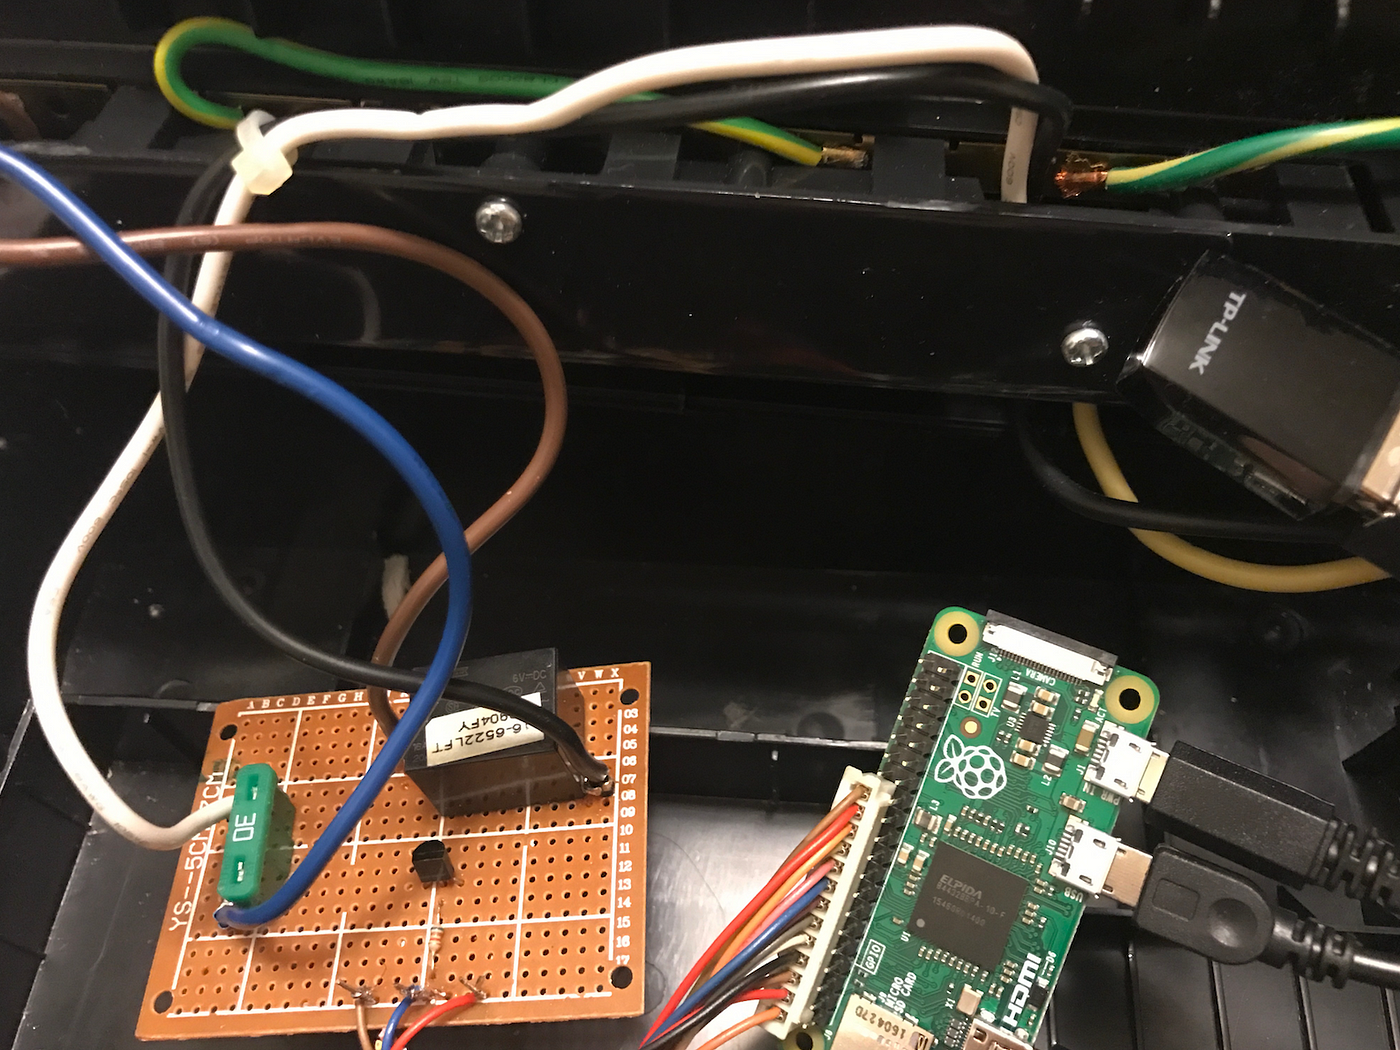 Enabling the hidden Wi-Fi radio on the Philips Hue Bridge 2.0: Adventures  with 802.11n, ZigBee 802.15.4 and OpenWrt, by R. X. Seger